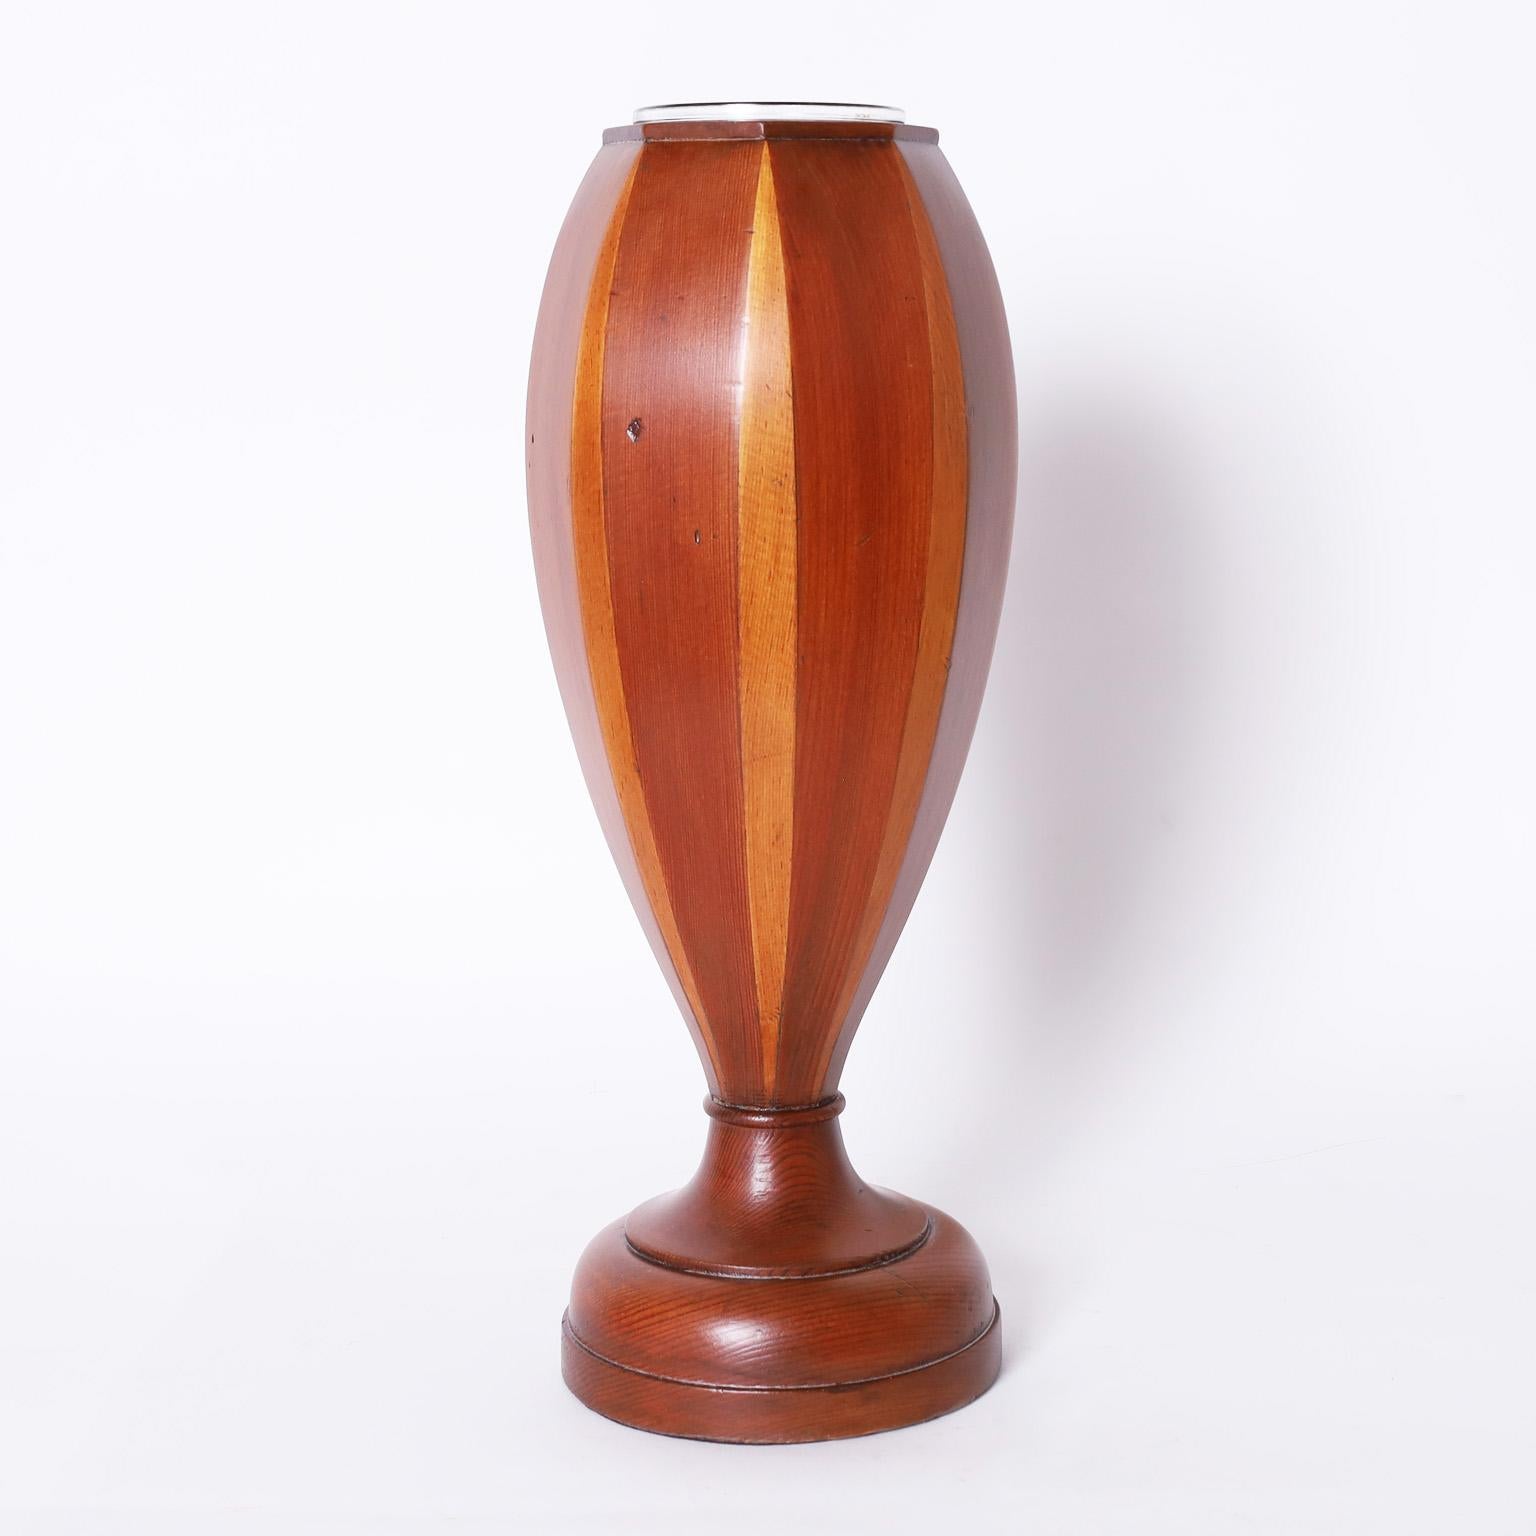 Elegant pair of mid-century vases crafted in stained and unstained mahogany in a sleek modern form with glass inserts on classic turned bases.